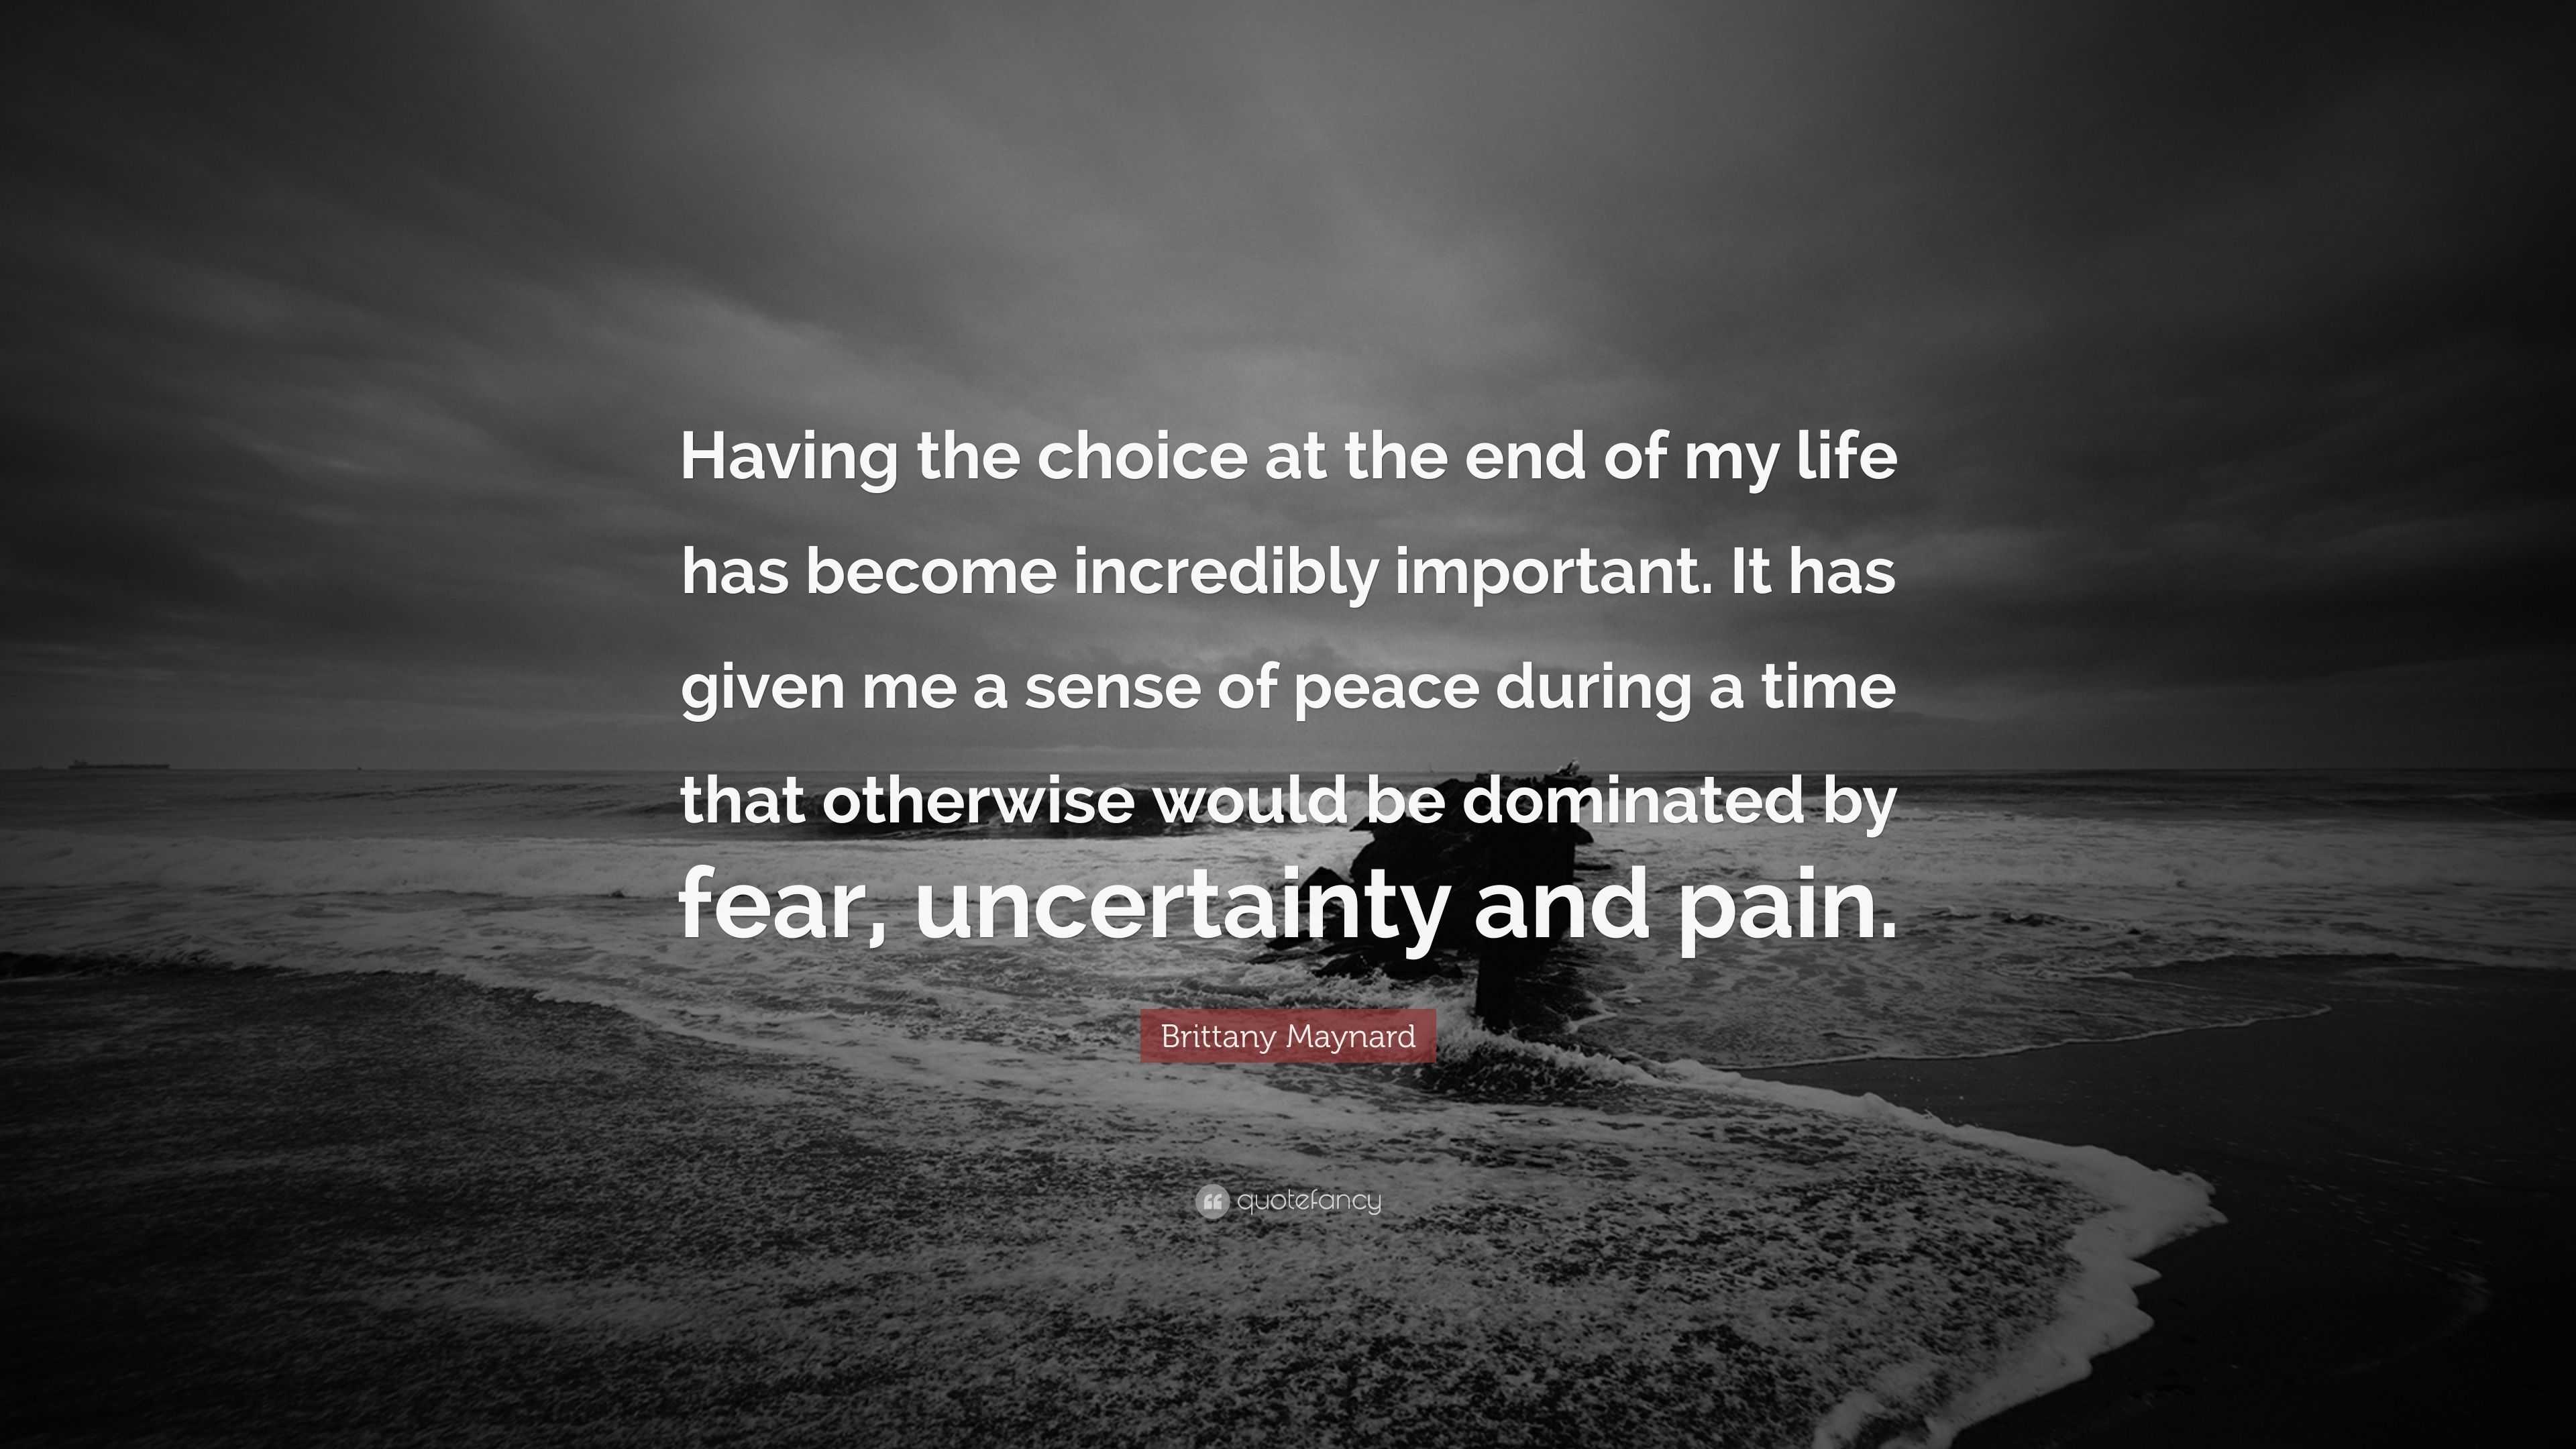 Brittany Maynard Quote: "Having the choice at the end of ...